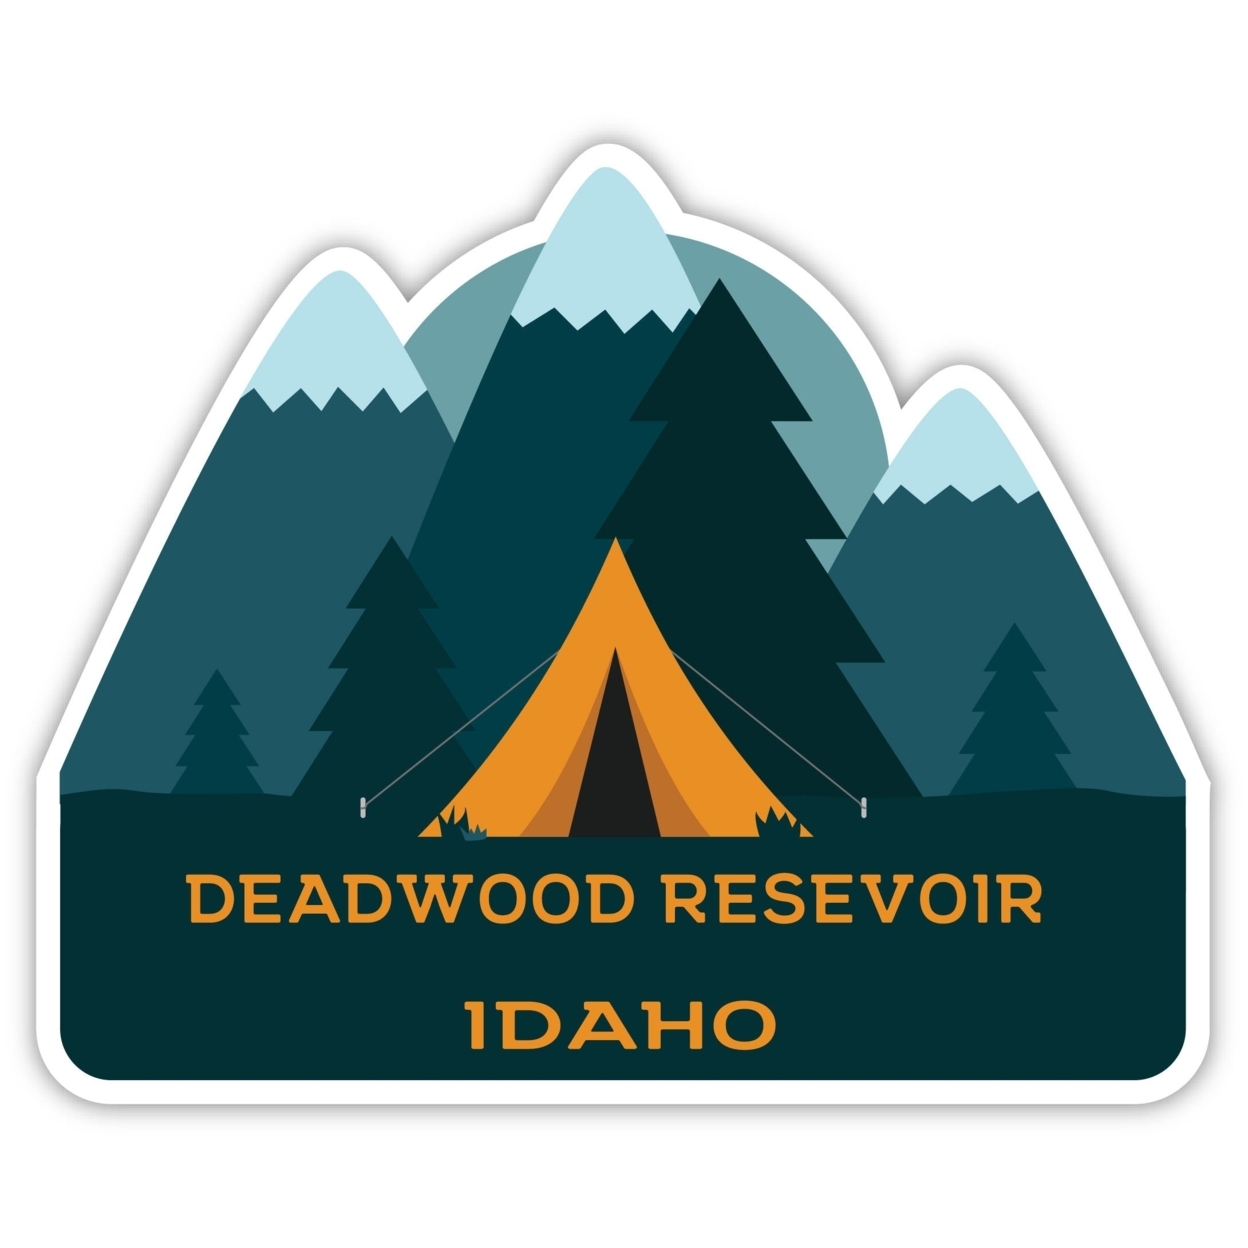 Deadwood Resevoir Idaho Souvenir Decorative Stickers (Choose Theme And Size) - 4-Pack, 4-Inch, Tent